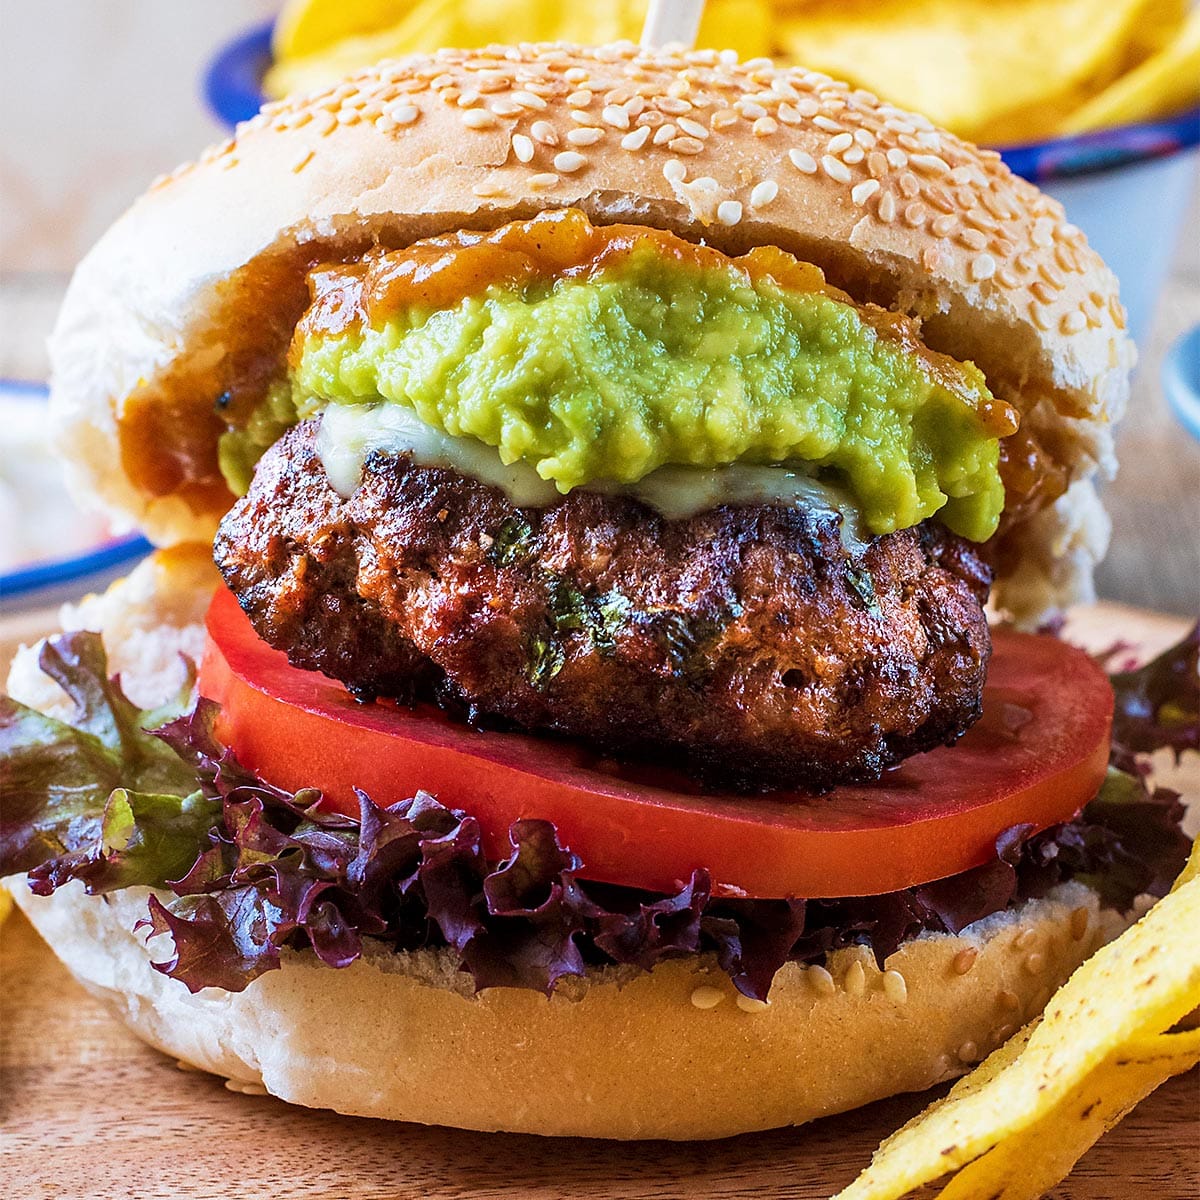 https://hungryhealthyhappy.com/wp-content/uploads/2019/11/Mexican-Burger-featured-b.jpg